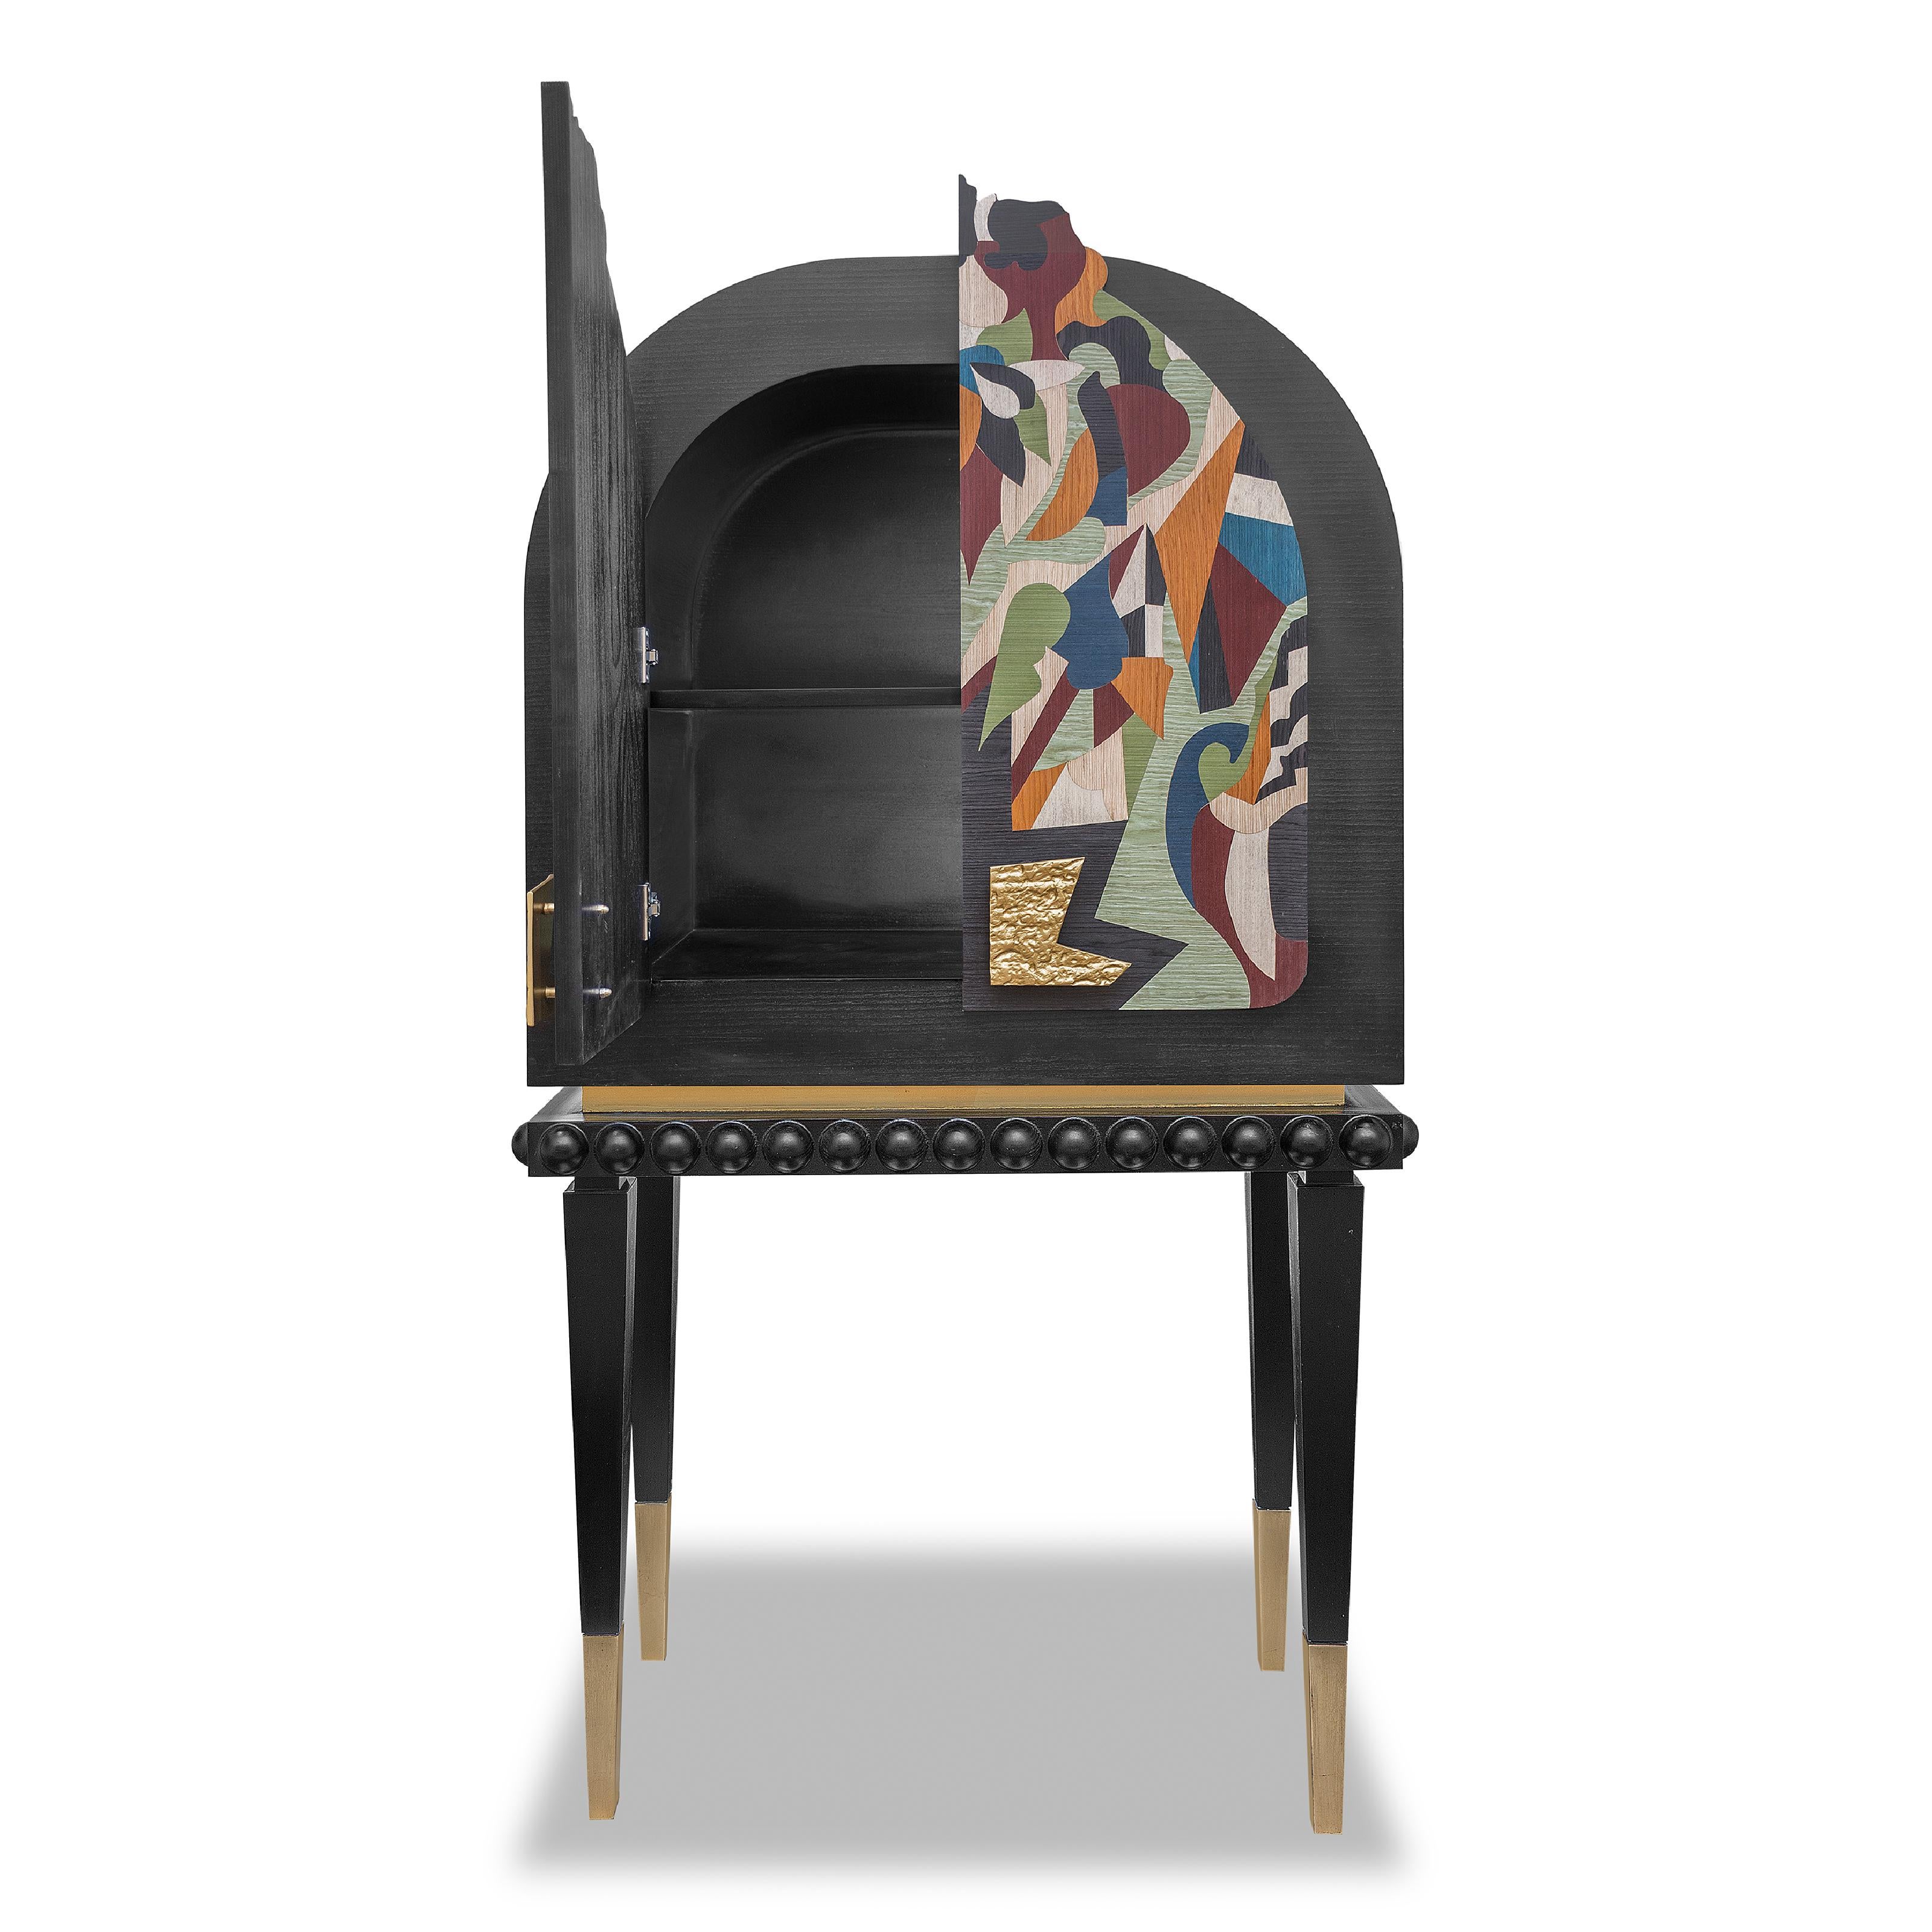 The cabinet design is inspired by Karim Ataya's painting of Gilgamesh, showcasing its essence through robust structure, bold lines, and intricate carvings. Floral motifs, soft curves, and a nature-inspired color palette bring tranquility and grace,